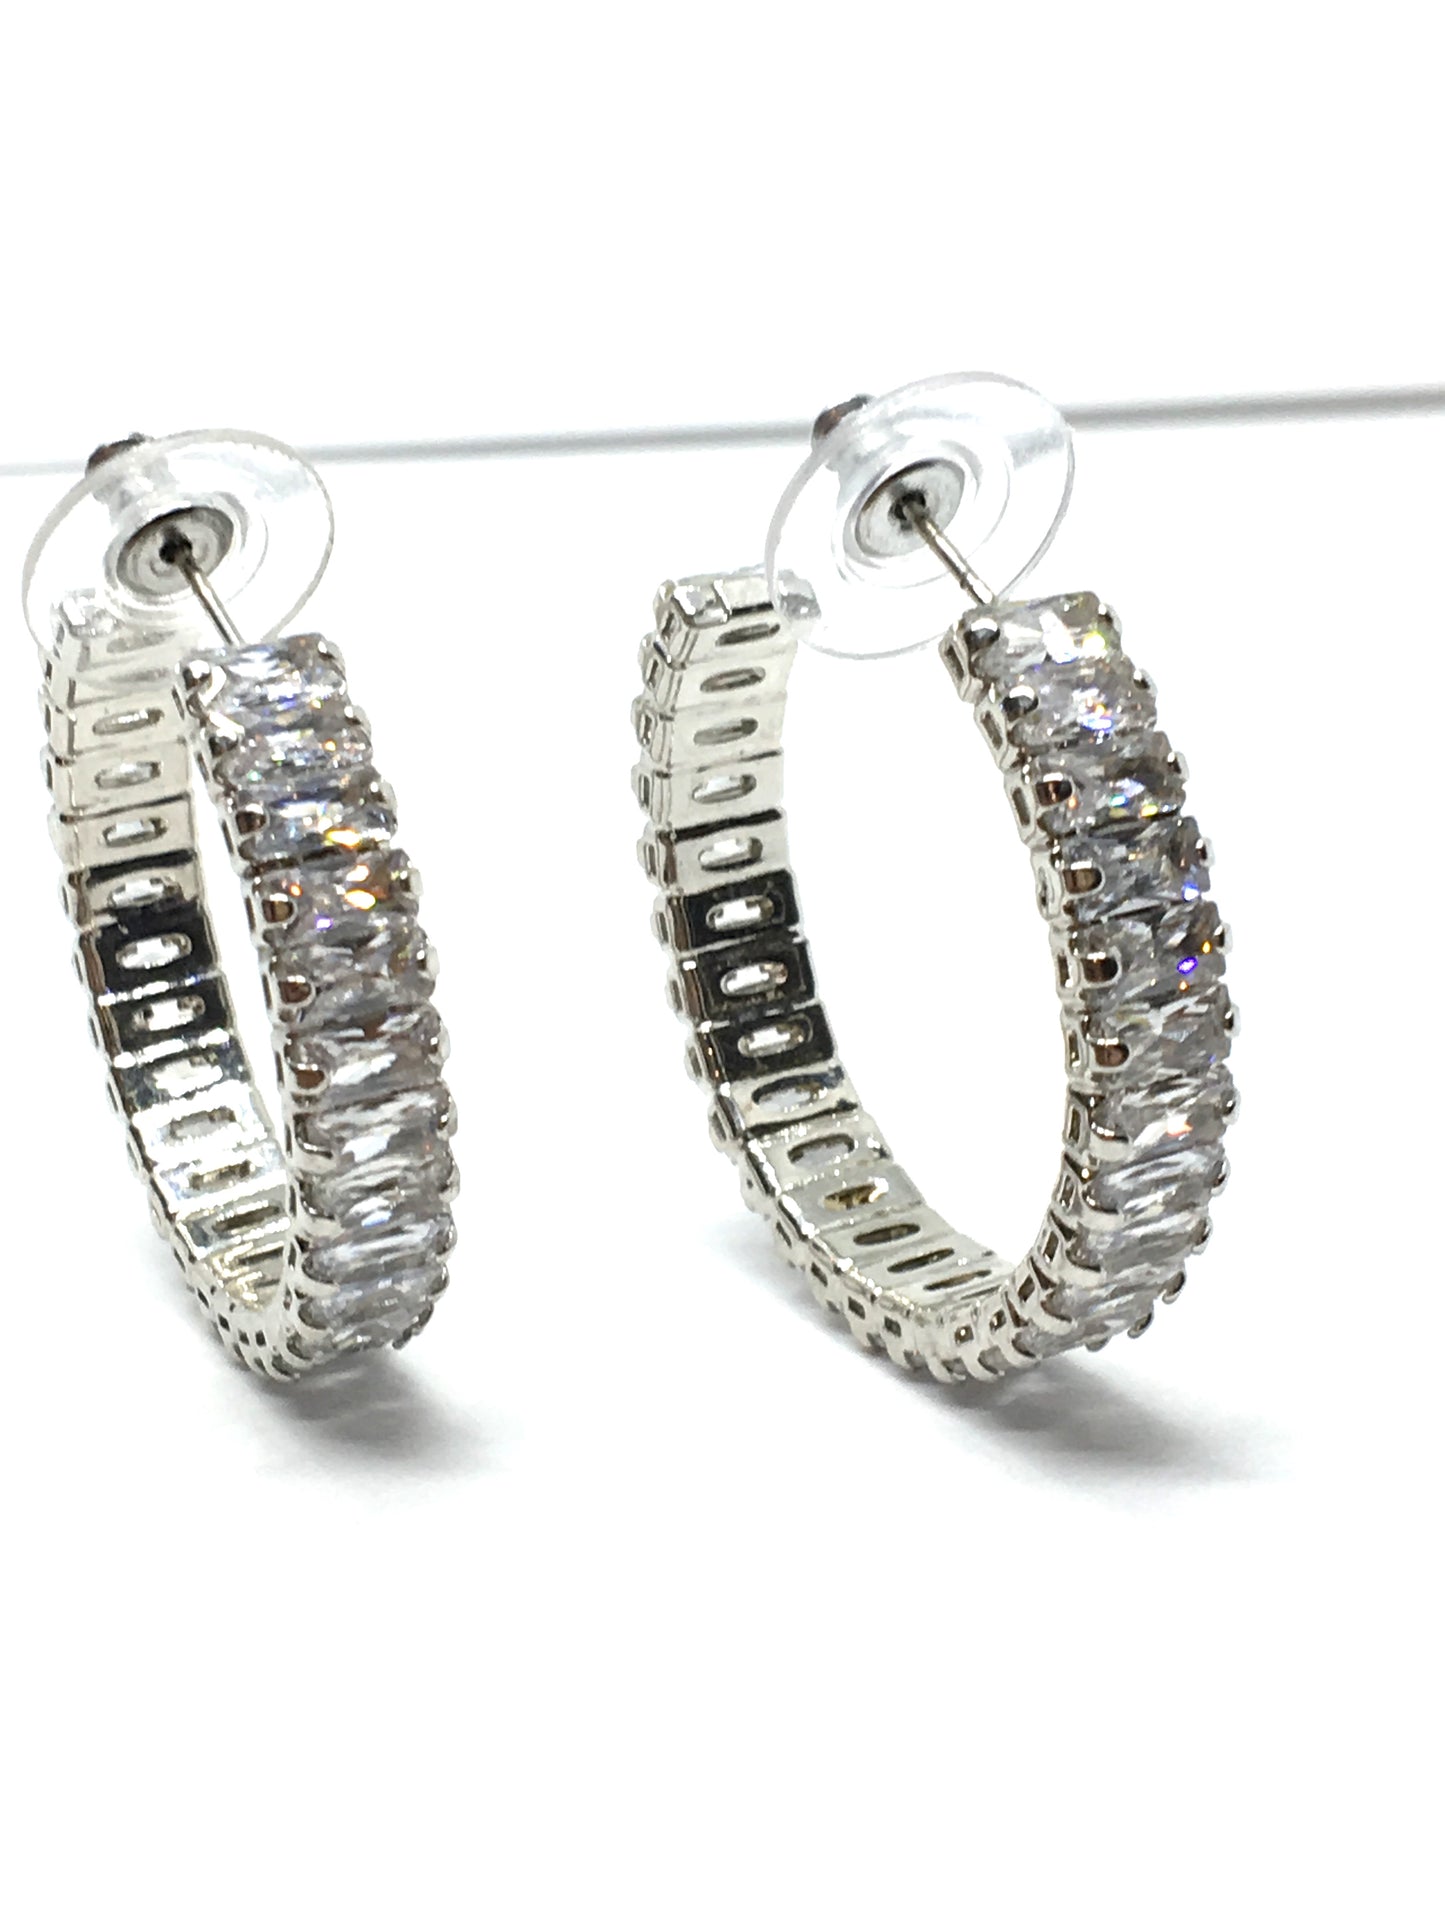 Womens used Sparkly CZ Silver Hoop Earrings